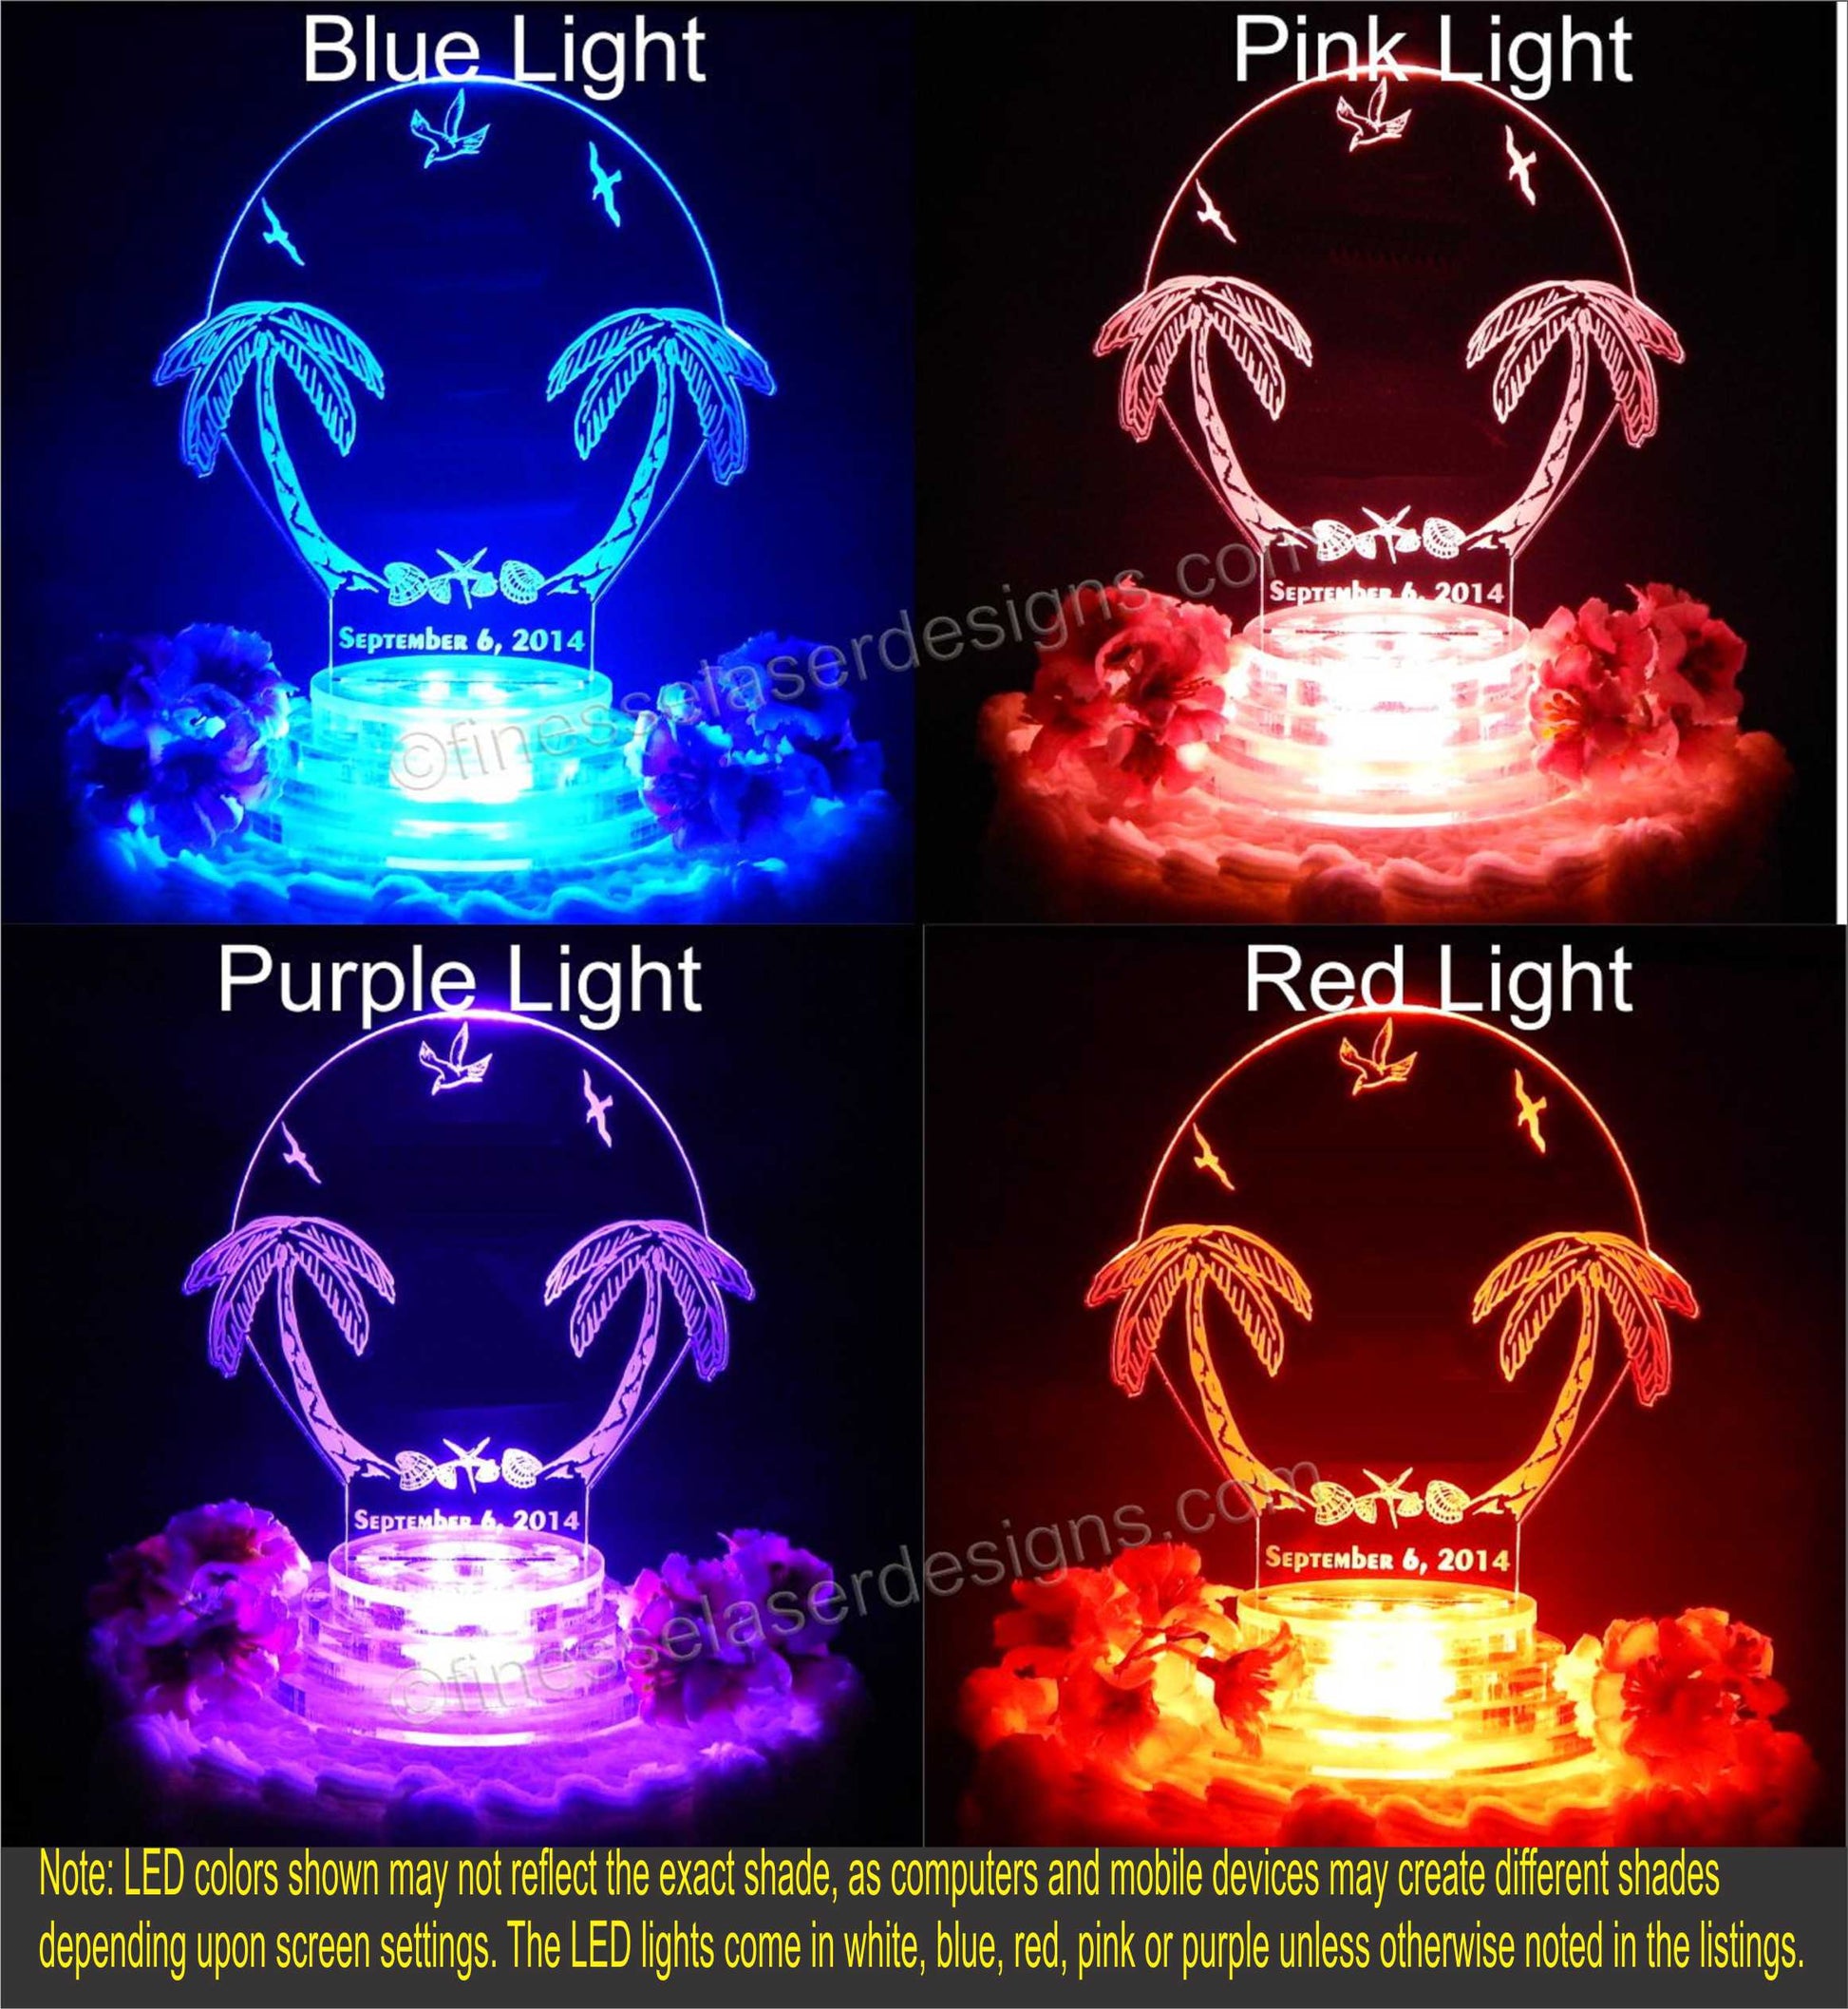 lighted views of an acrylic cake topper designed with palm trees and seagulls showing blue, pink, purple and red lighted views